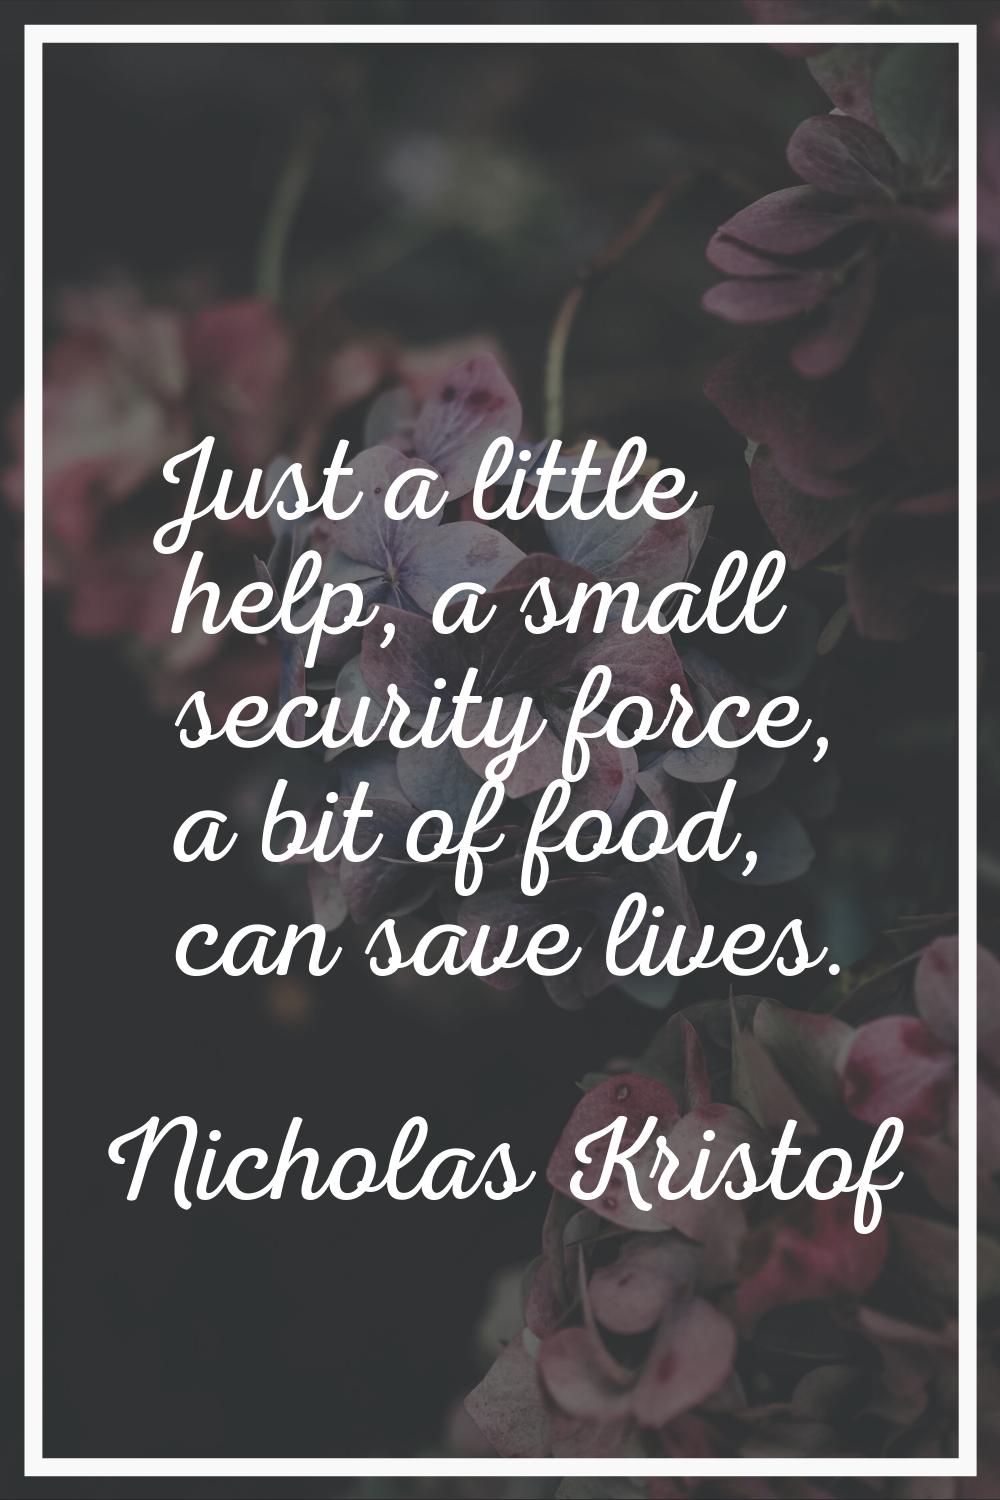 Just a little help, a small security force, a bit of food, can save lives.